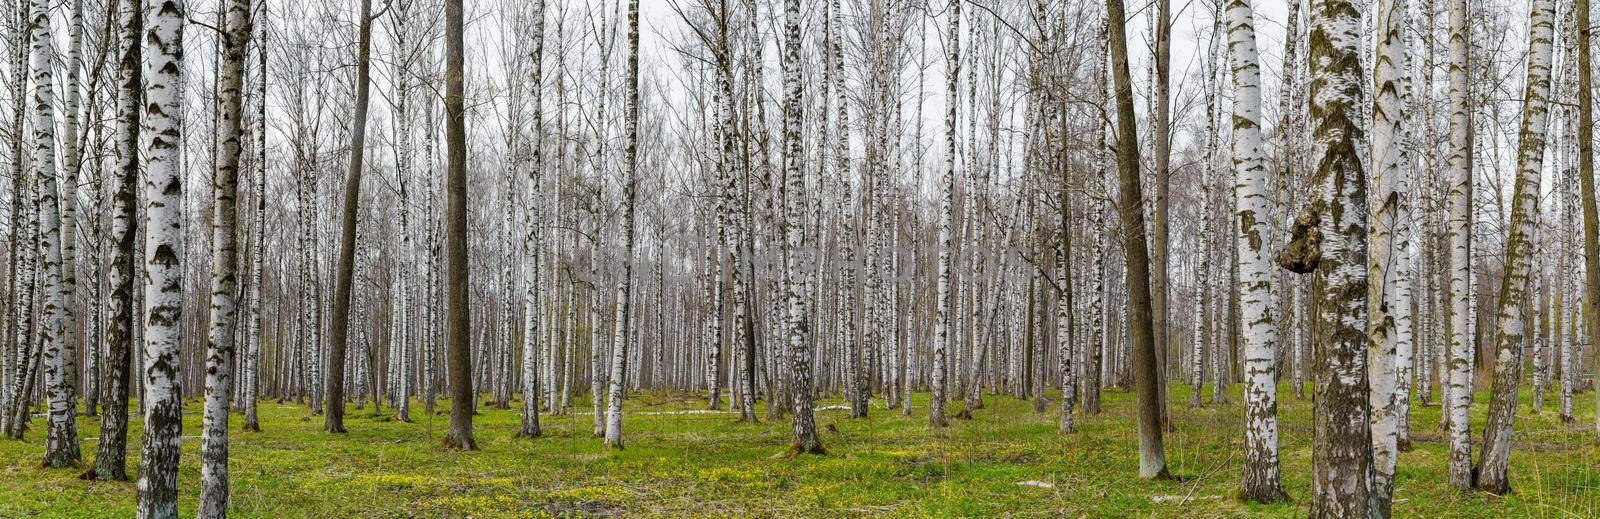 Panorama of a birch grove on green grass in a natural park in cloudy weather, the first days of spring, green leaves begin to appear by vladimirdrozdin